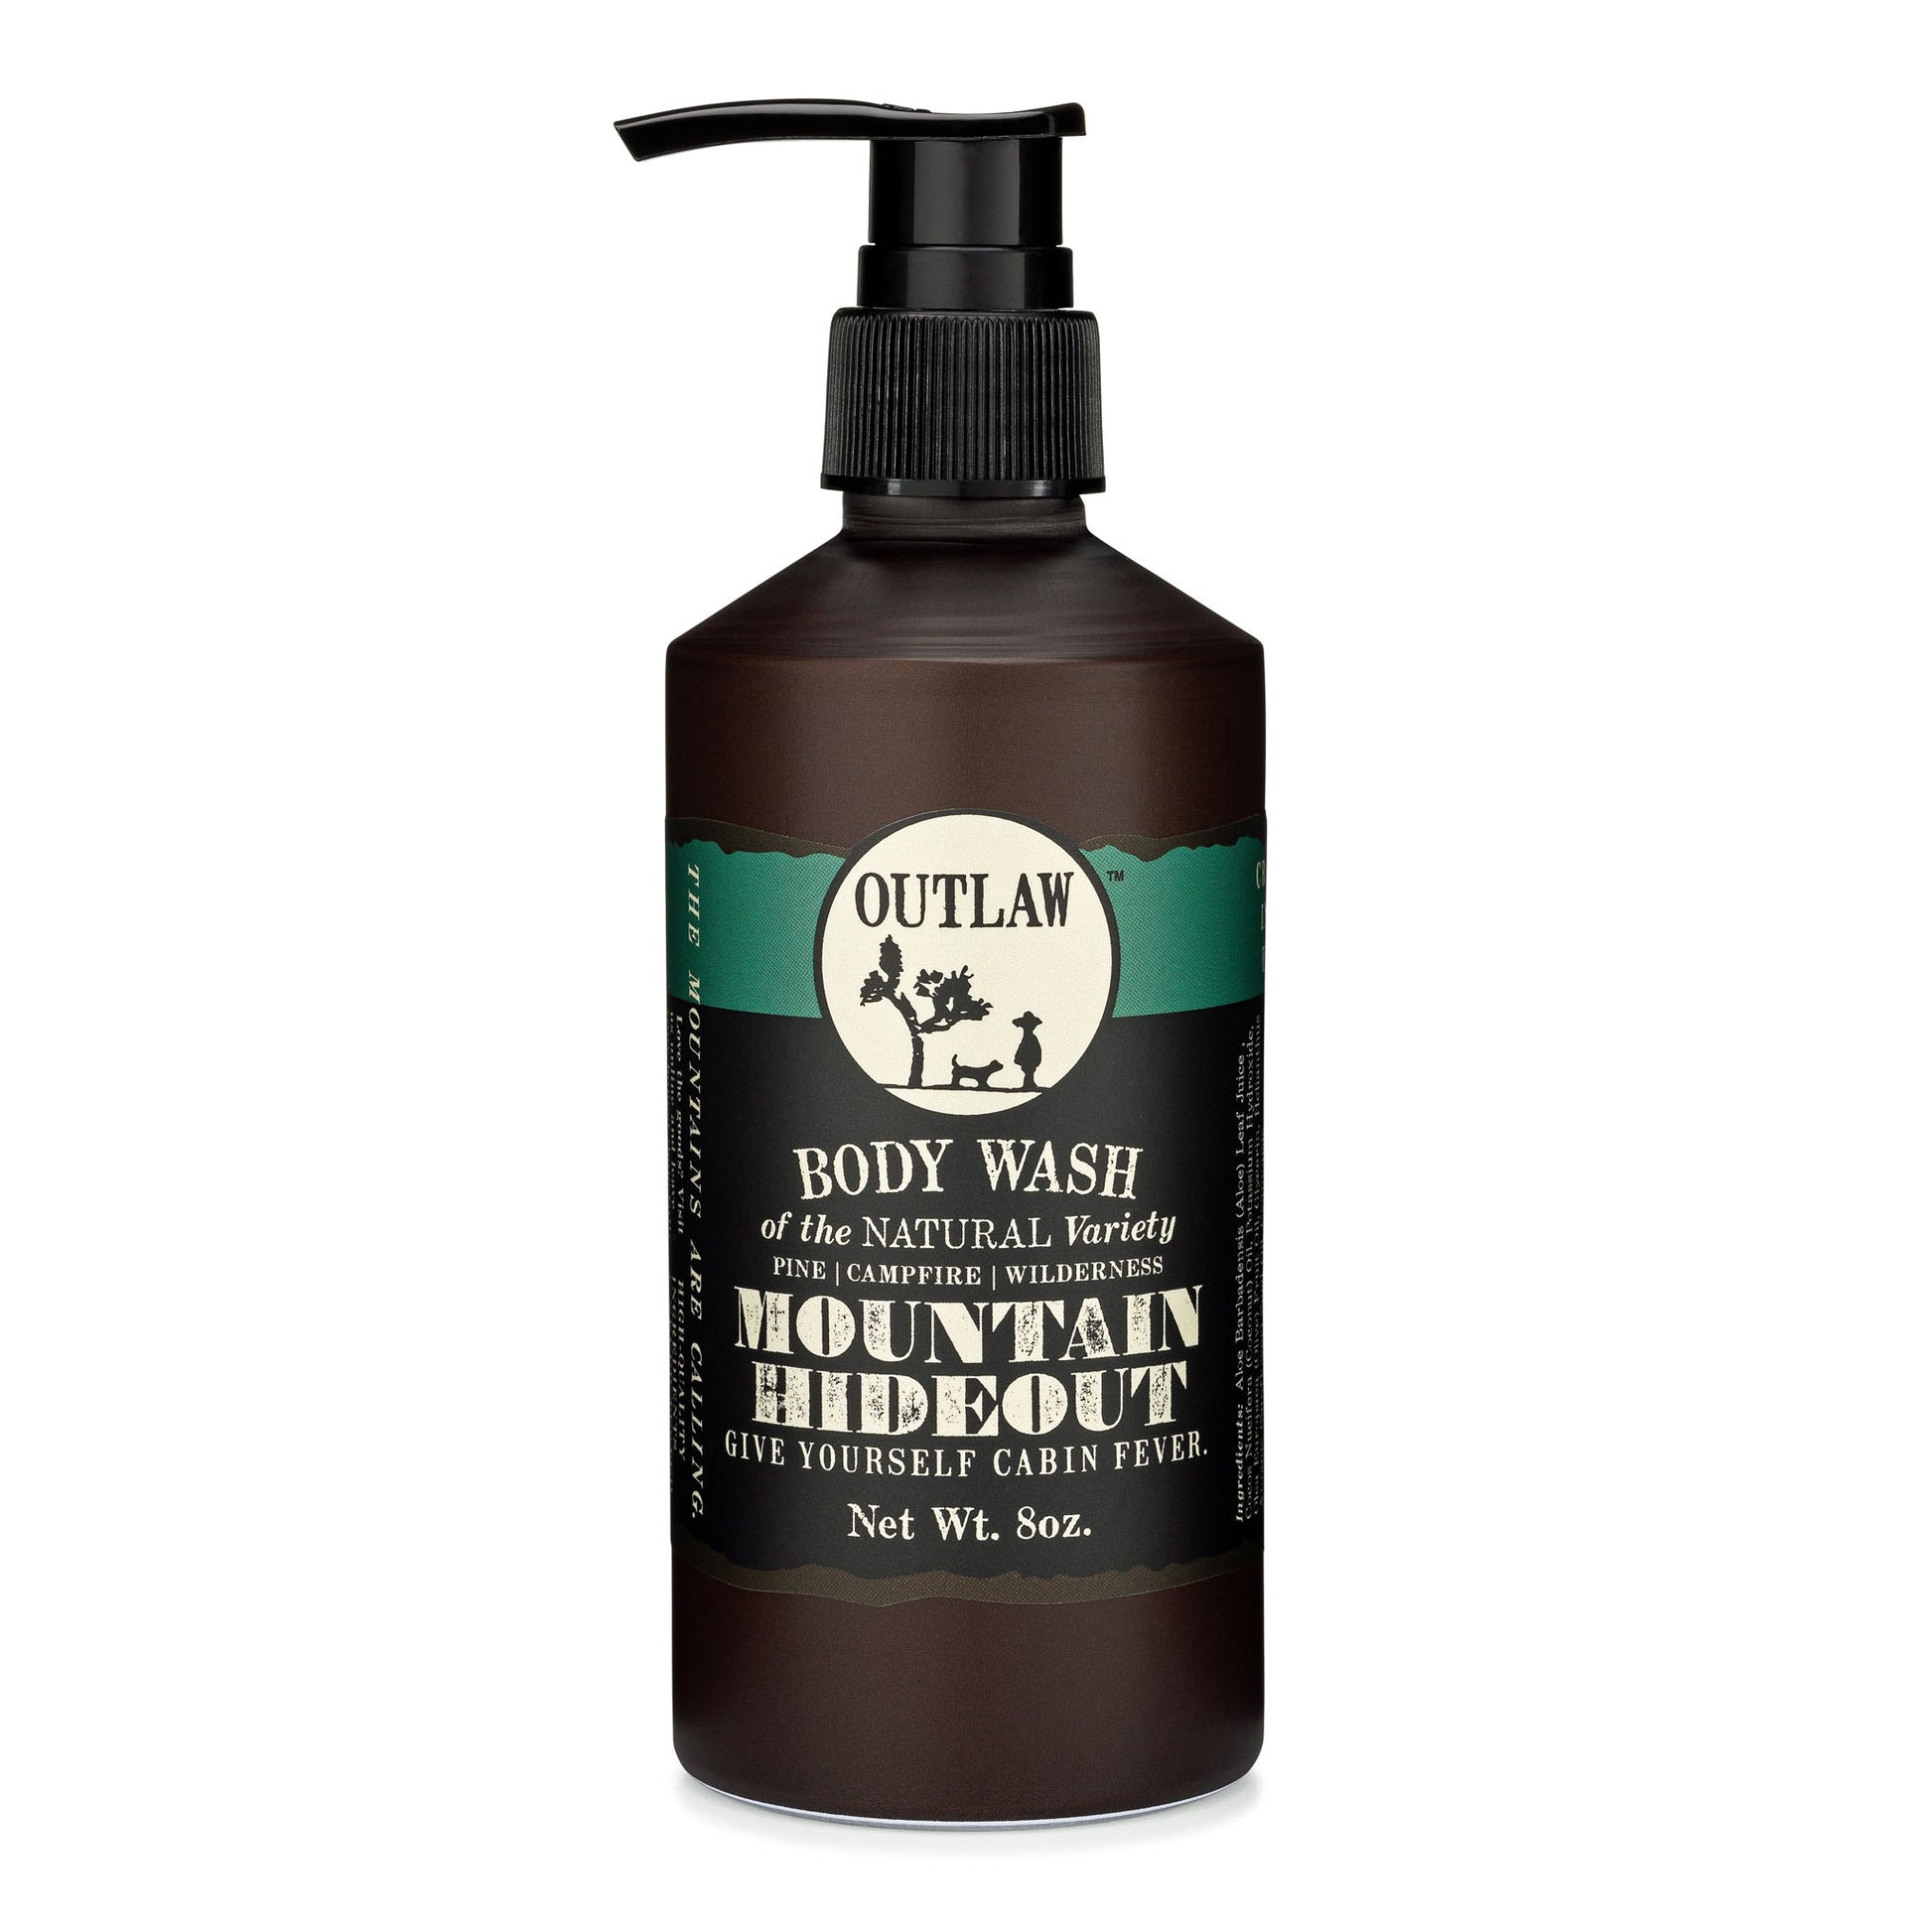 Fresh pine and earth scented natural body wash from Outlaw